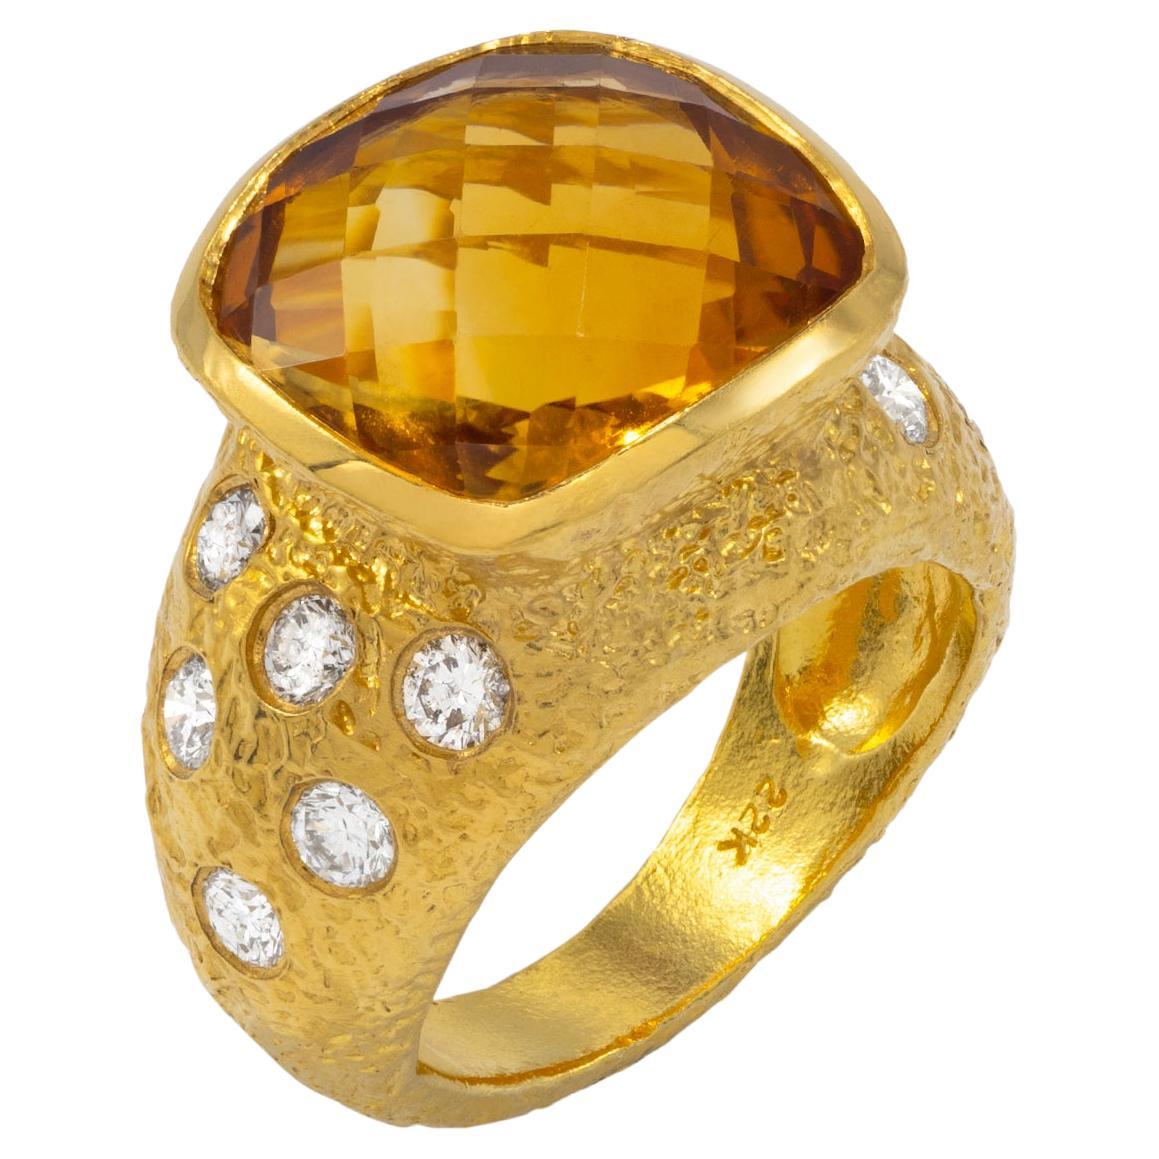 22k Gold Citrine Birthstone Cocktail Ring with Diamonds, by Tagili For Sale